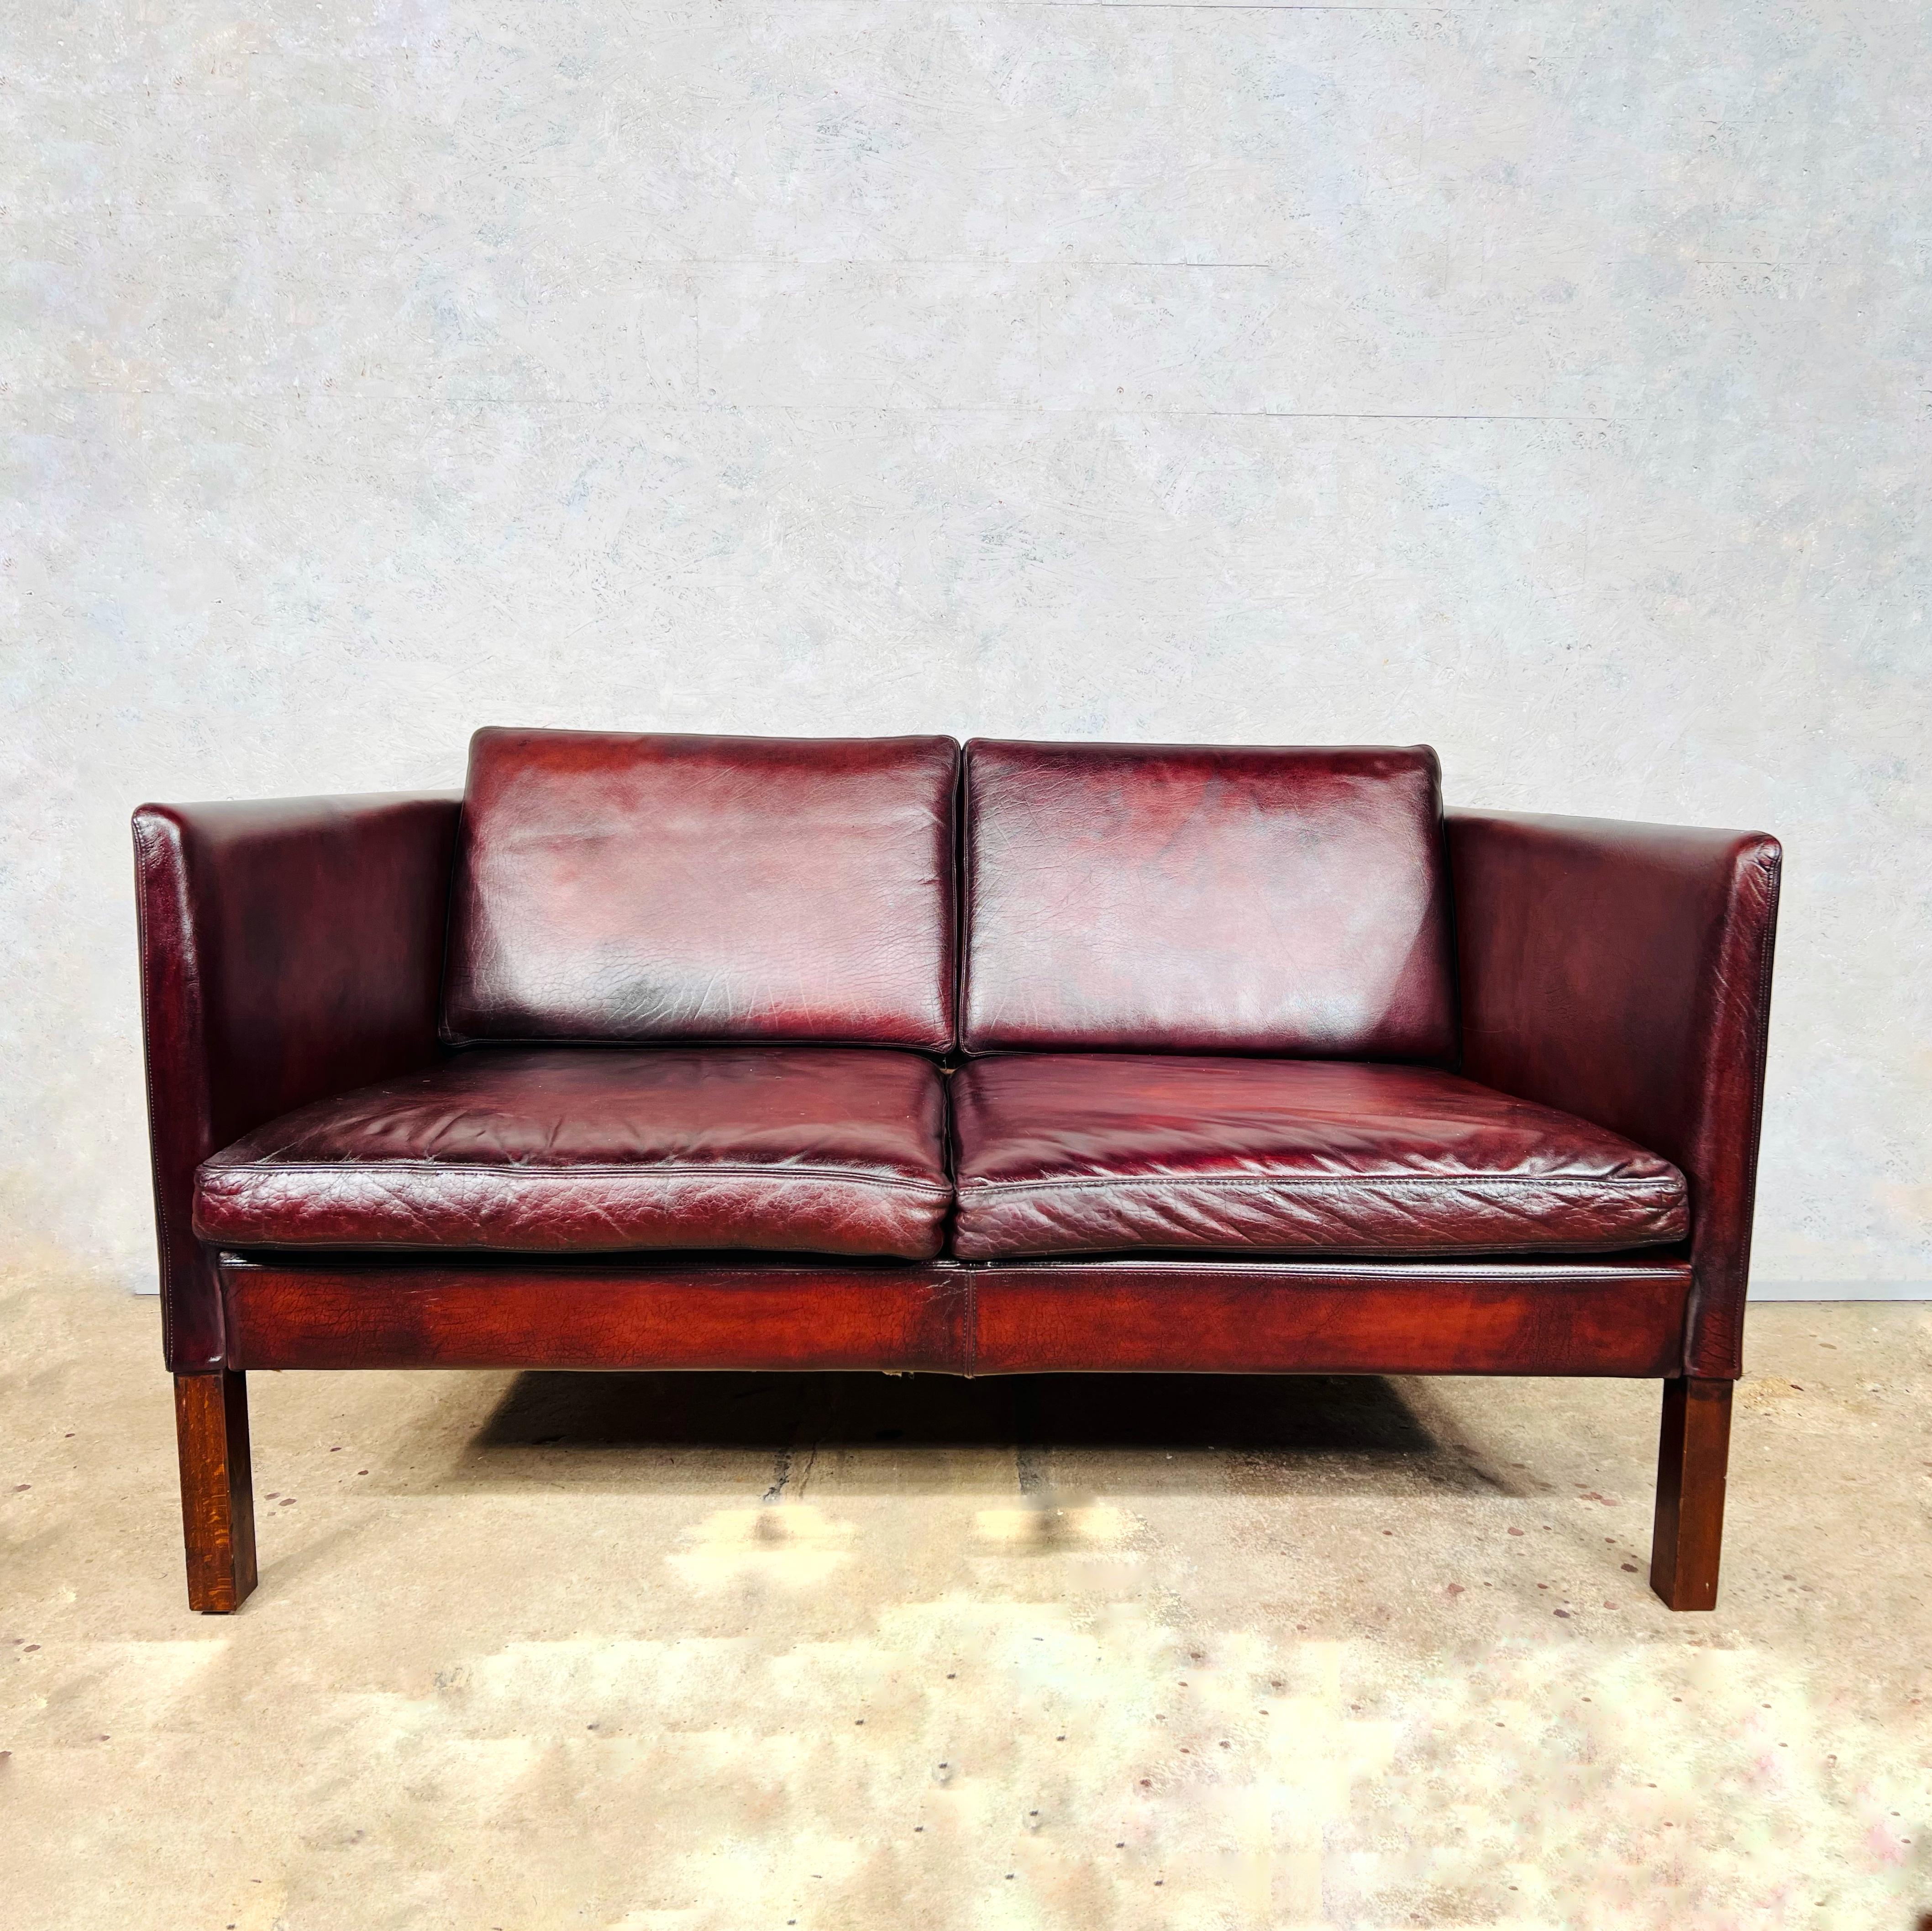 Vintage Danish 1970s midcentury chestnut two seater leather sofa.

Very Stylish with elegant proportions. Sits wonderfully, restored and hand dyed a beautiful rich Chestnut, with a great patina.


